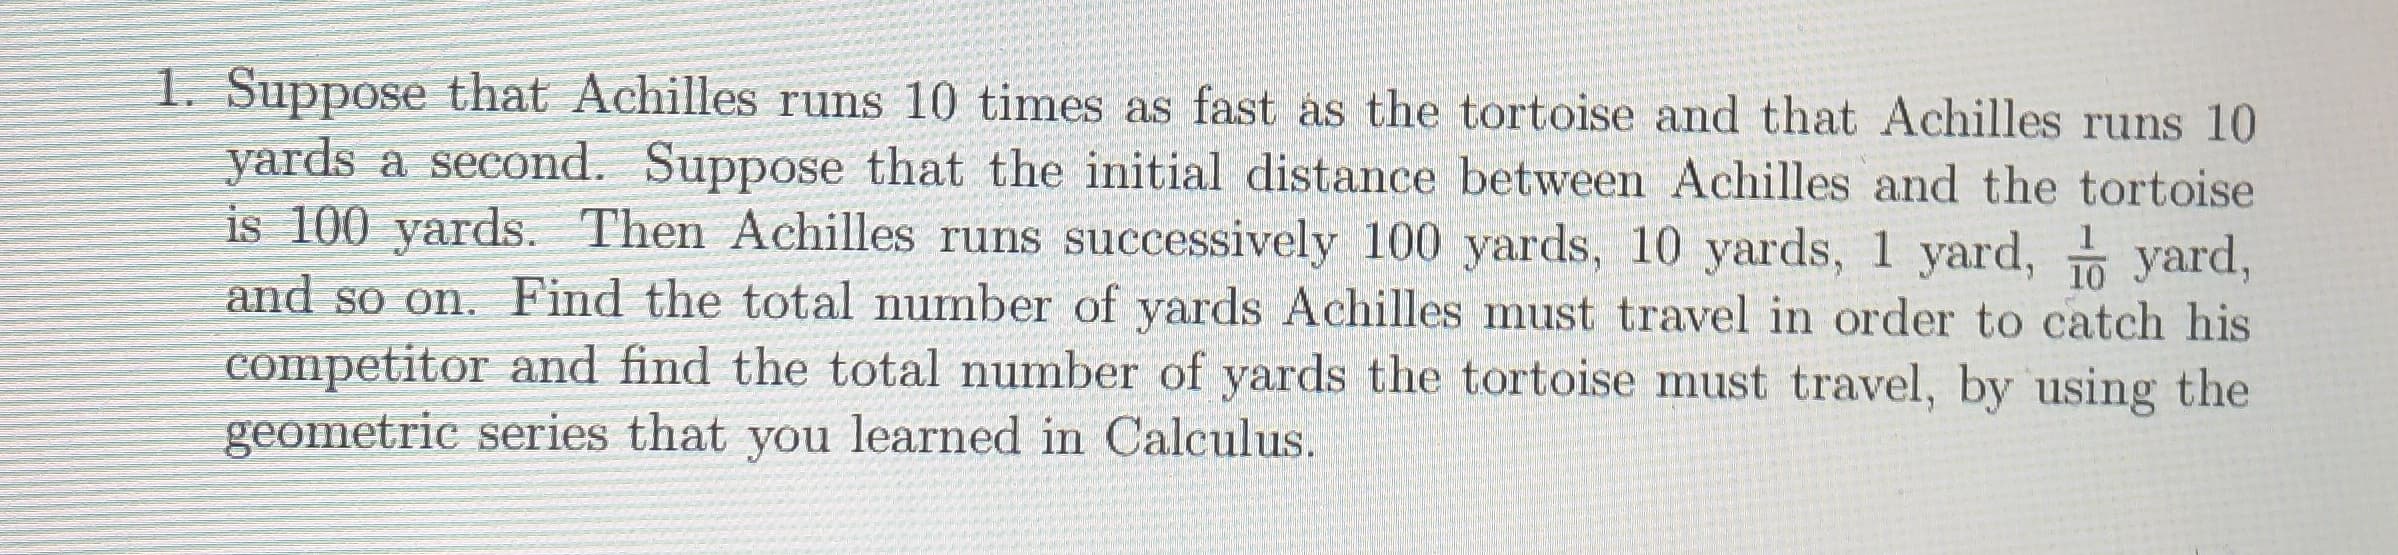 1. Suppose that Achilles runs 10 times as fast as the tortoise and that Achilles runs 10
yards a second. Suppose that the initial distance between Achilles and the tortoise
is 100 yards. Then Achilles runs successively 100 yards, 10 yards, 1 yard,
and so on. Find the total number of yards Achilles must travel in order to catch his
competitor and find the total number of yards the tortoise must travel, by using the
geometric series that you learned in Calculus.
1
10
yard,
